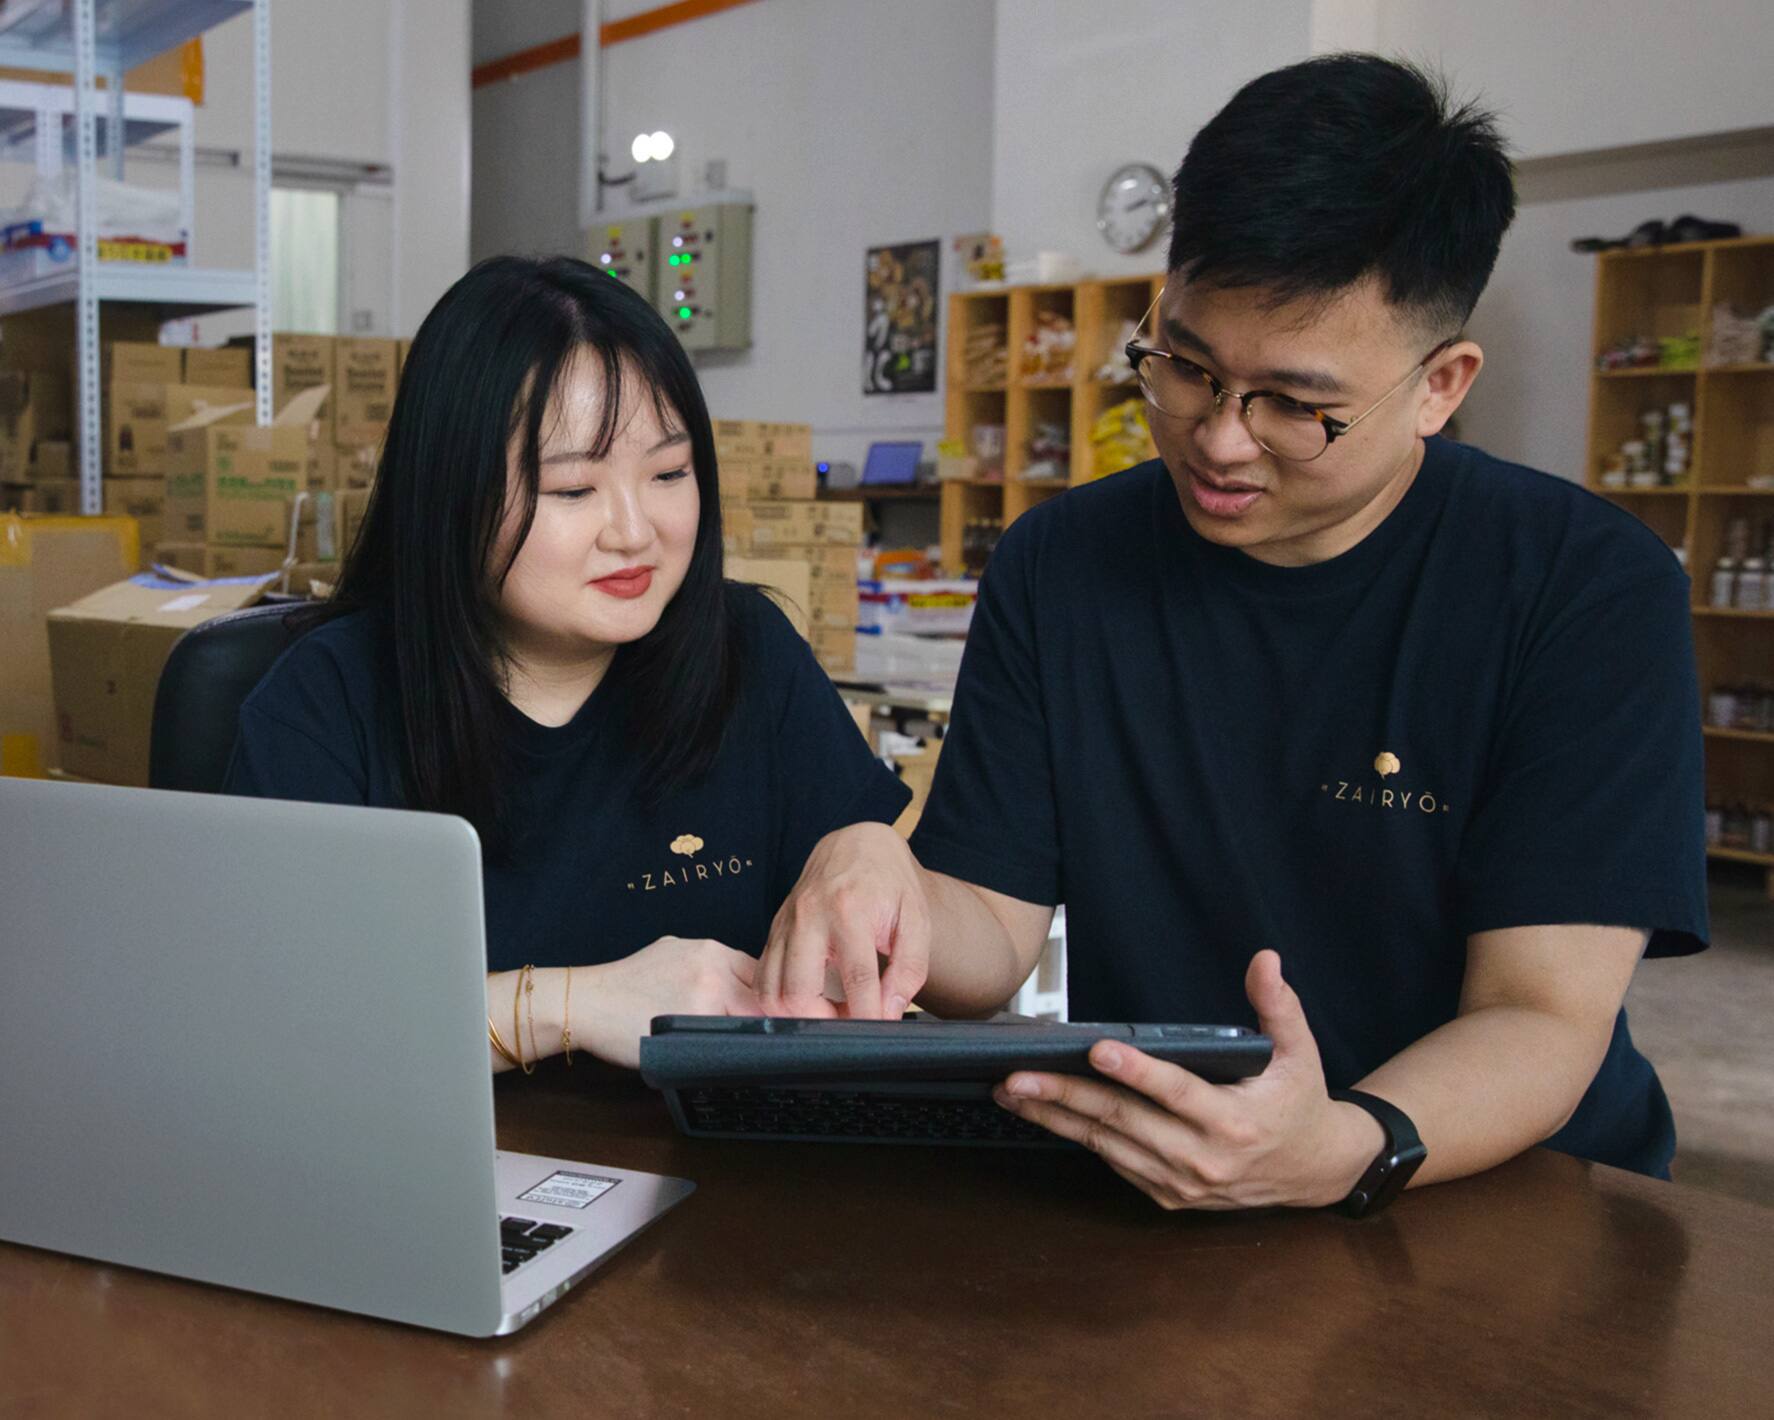 Image of the founders of ‘Zairyo’, a customer of Xero (from right to left) where two people are seated in front of a laptop and are both consulting a tablet.